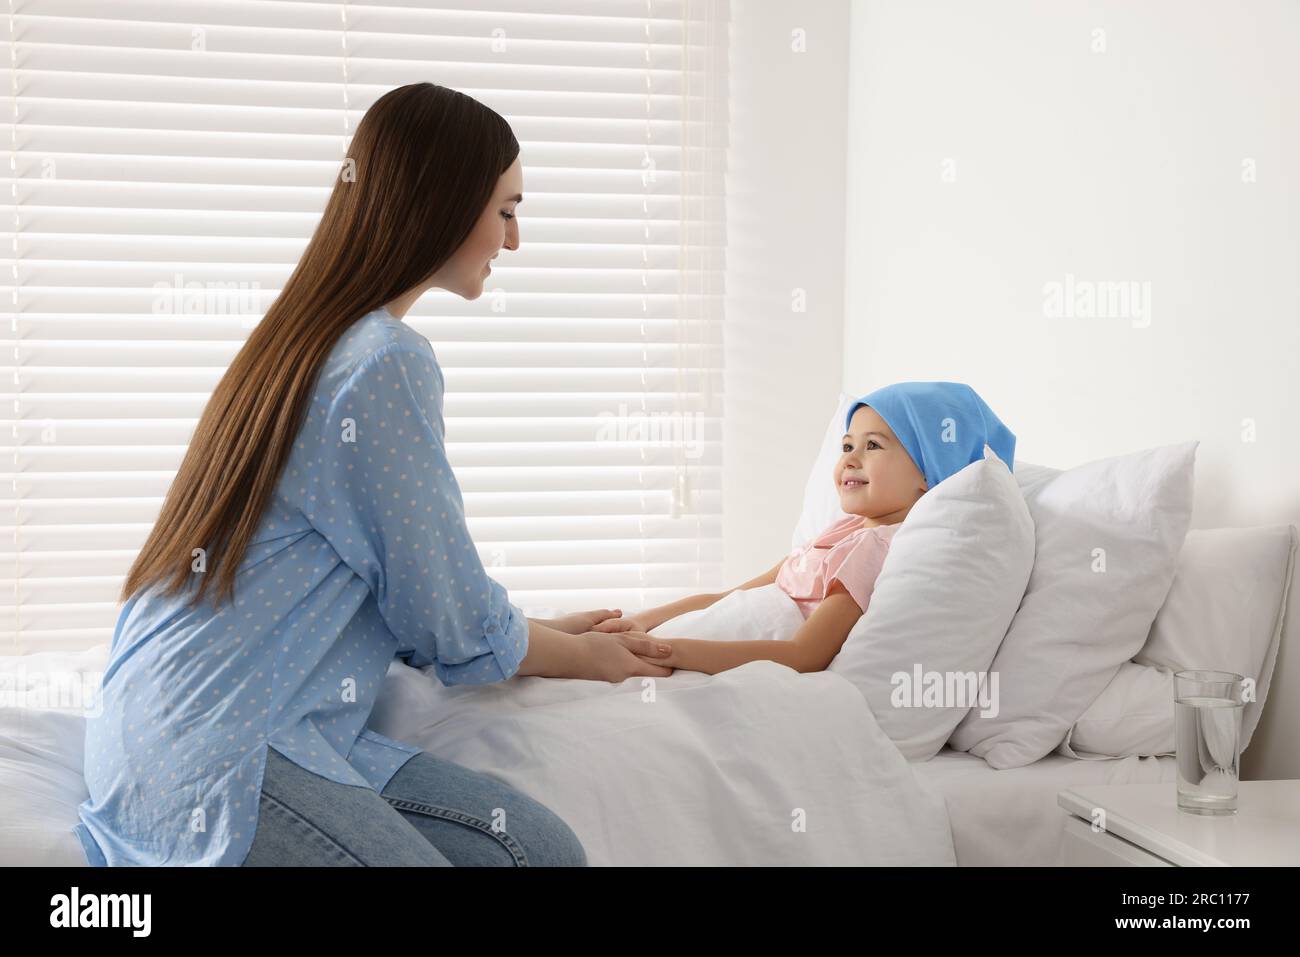 Childhood cancer. Mother and daughter in hospital Stock Photo